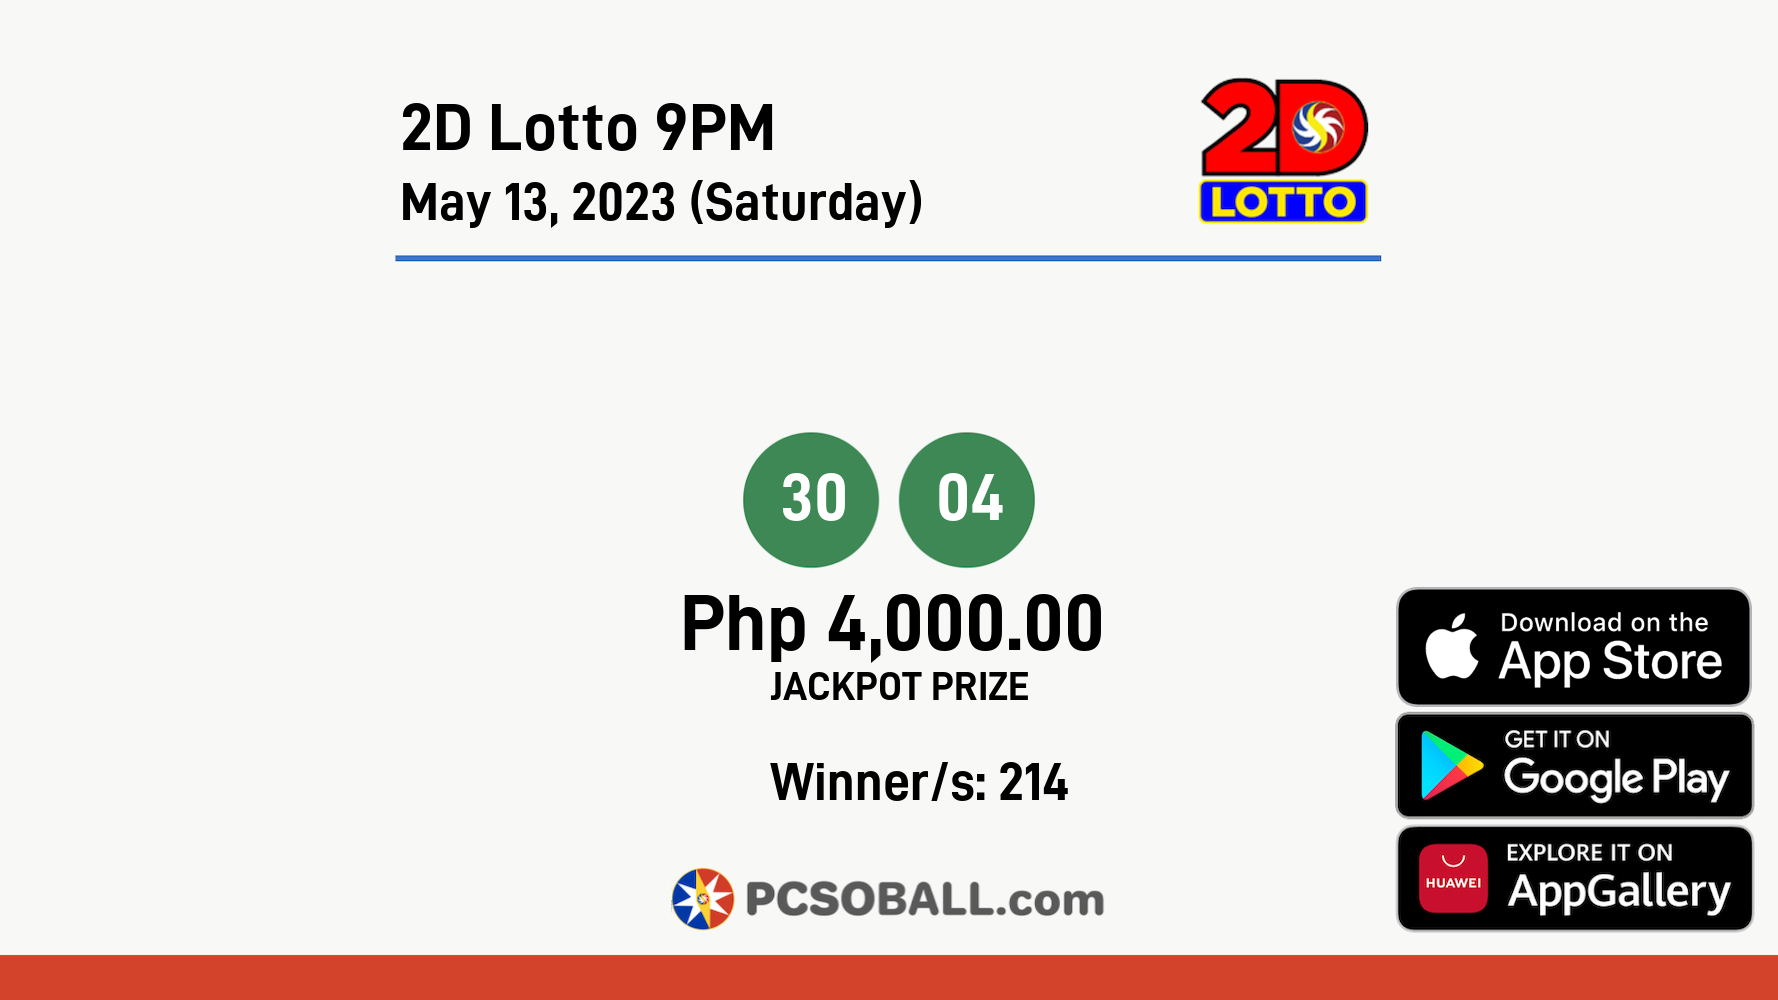 2D Lotto 9PM May 13, 2023 (Saturday) Result